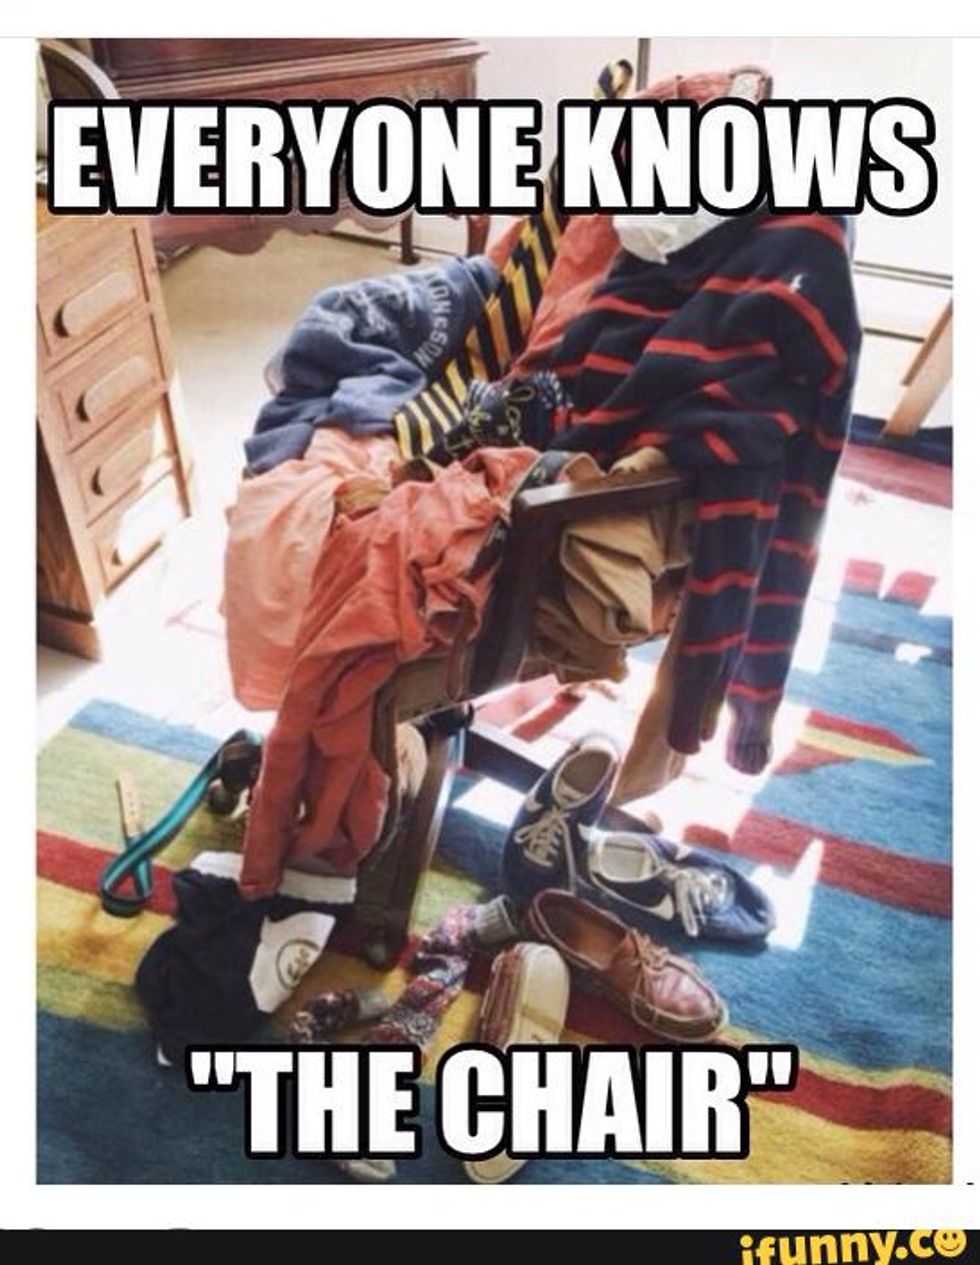 17 Signs You're The Unbearably Messy Roommate